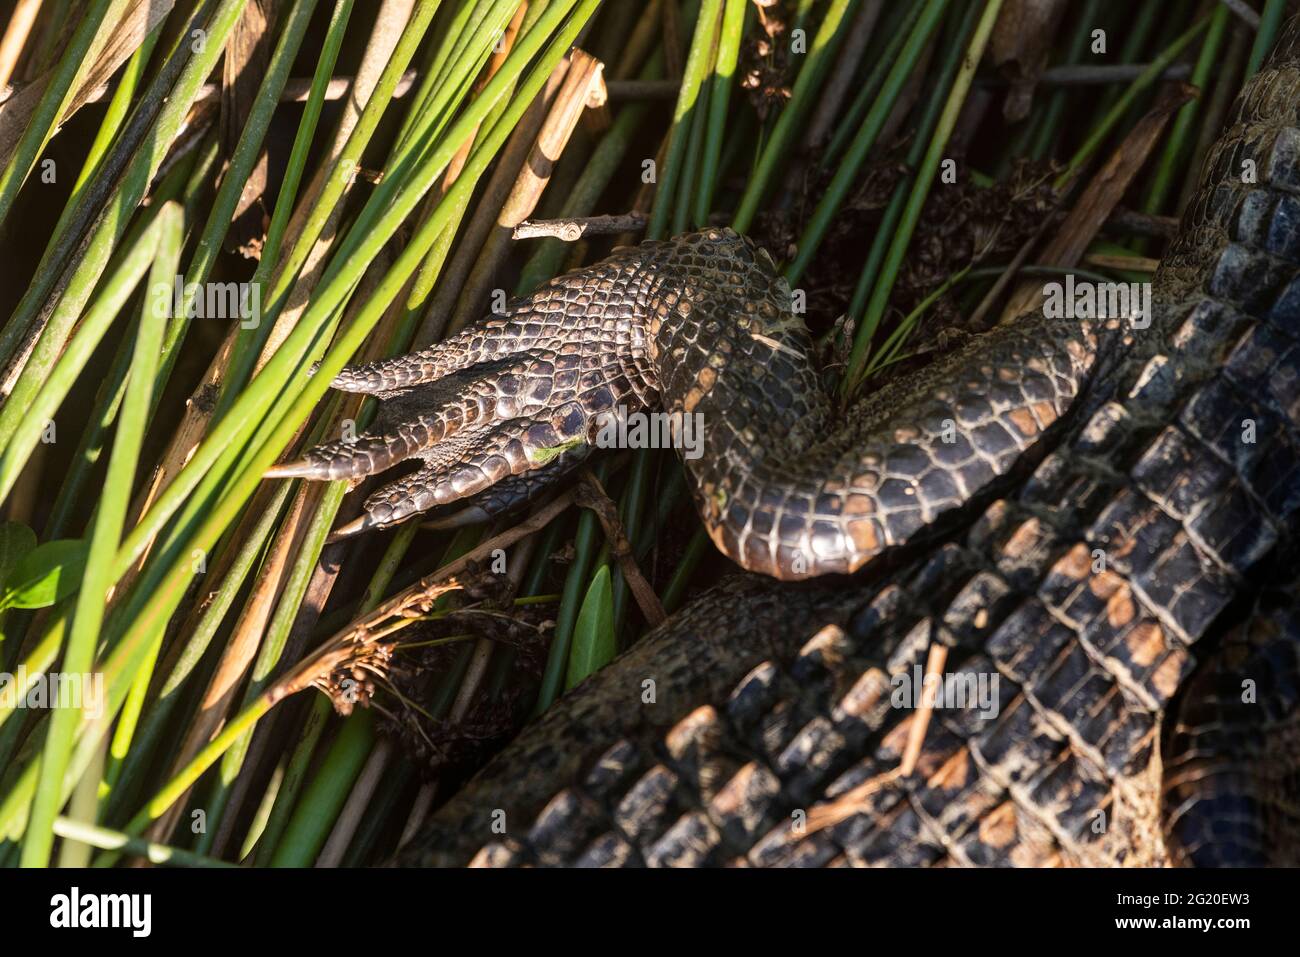 Closeup of the back leg of a juvenile alligator working through the foliage on the way to the water at Meaher State Park in Alabama on May 10, 2021. Stock Photo